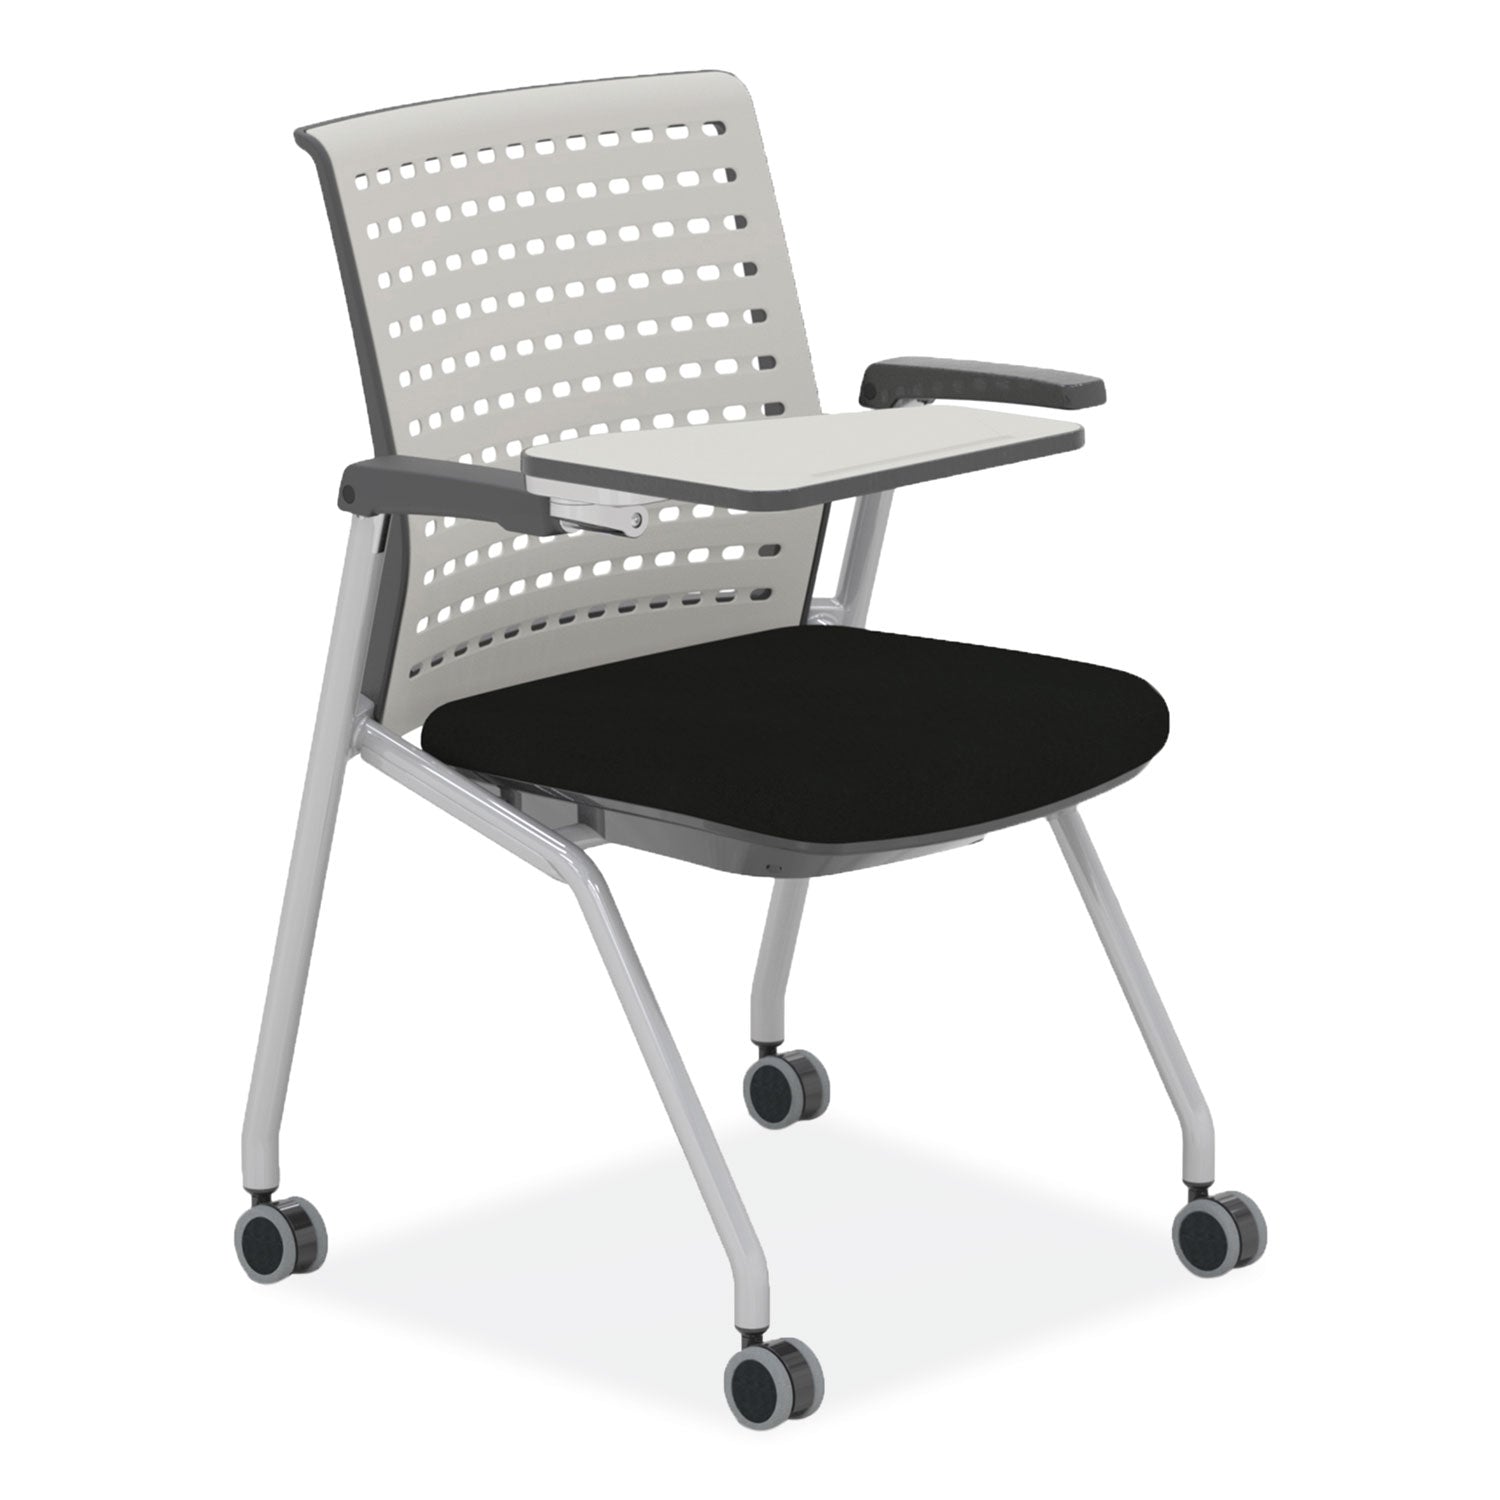 thesis-training-chair-w-static-back-and-tablet-supports-250lb-18-high-black-seatgray-back-baseships-in-1-3-business-days_safkts3sgblk - 1